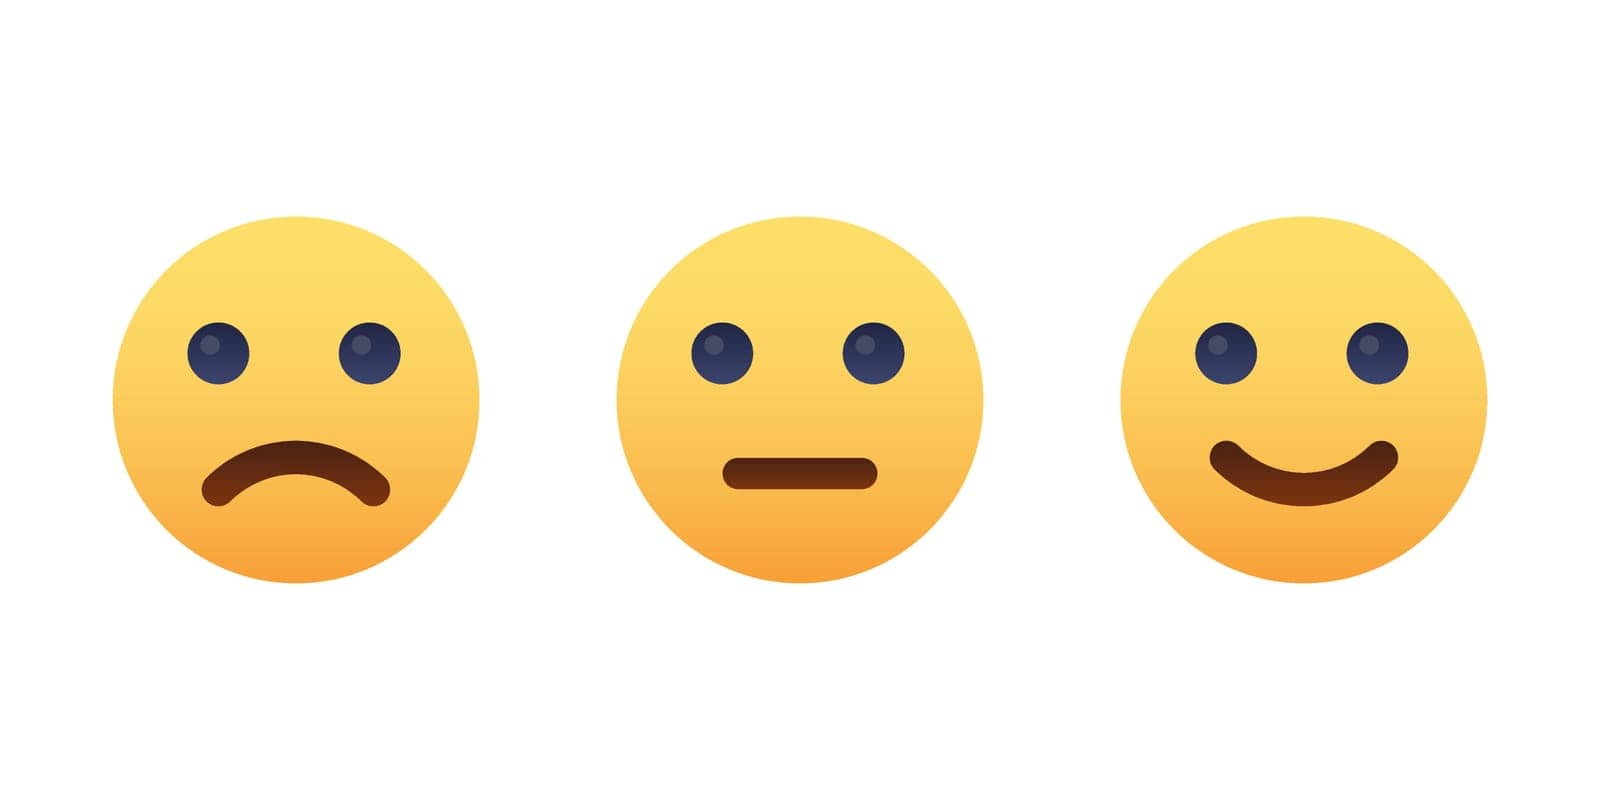 Smile face icon set. Different emotions by misteremil